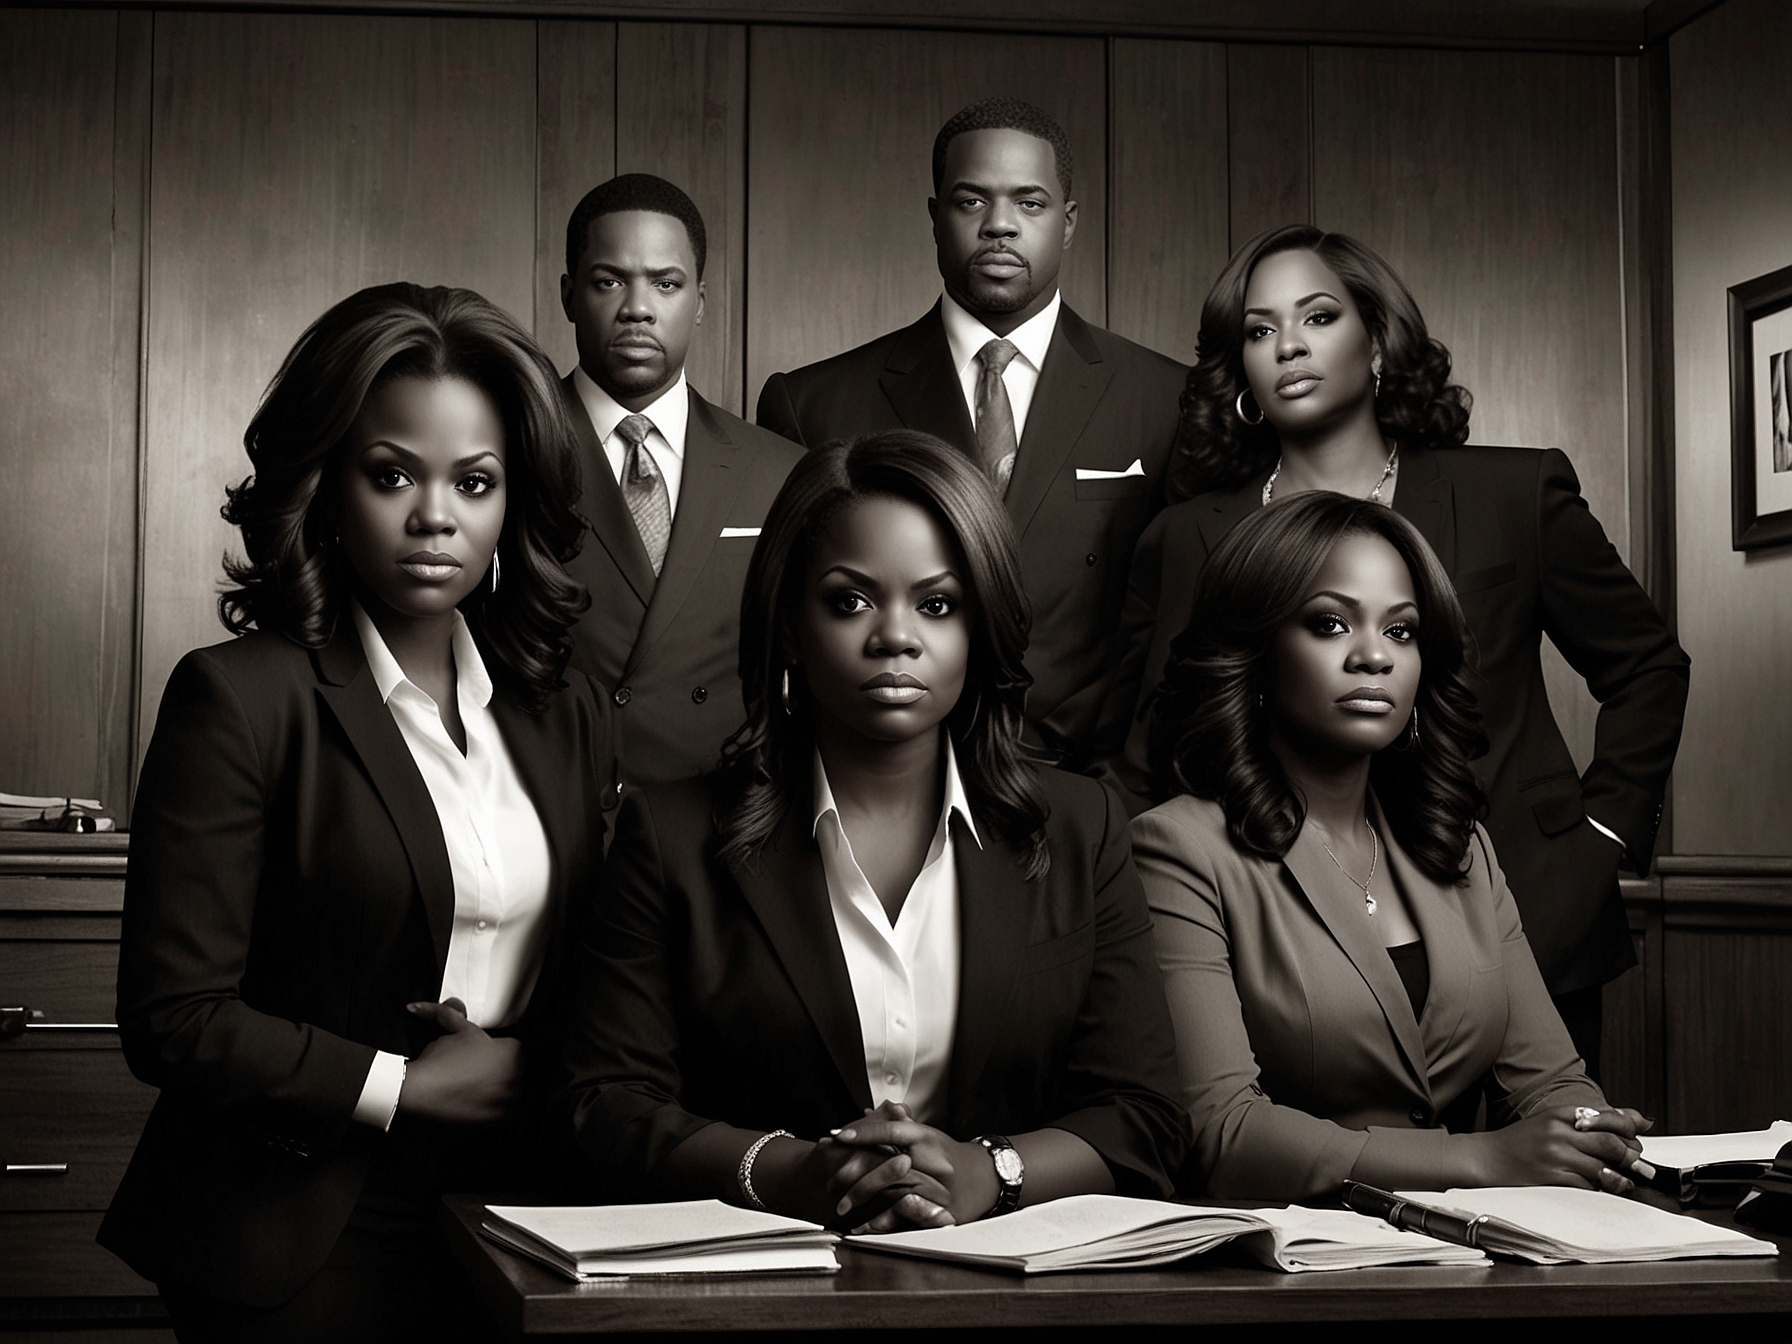 A promotional image for 'Reasonable Doubt' season 2 featuring Kandi Burruss alongside other cast members. The intense expressions hint at the series' compelling and dramatic legal battles.